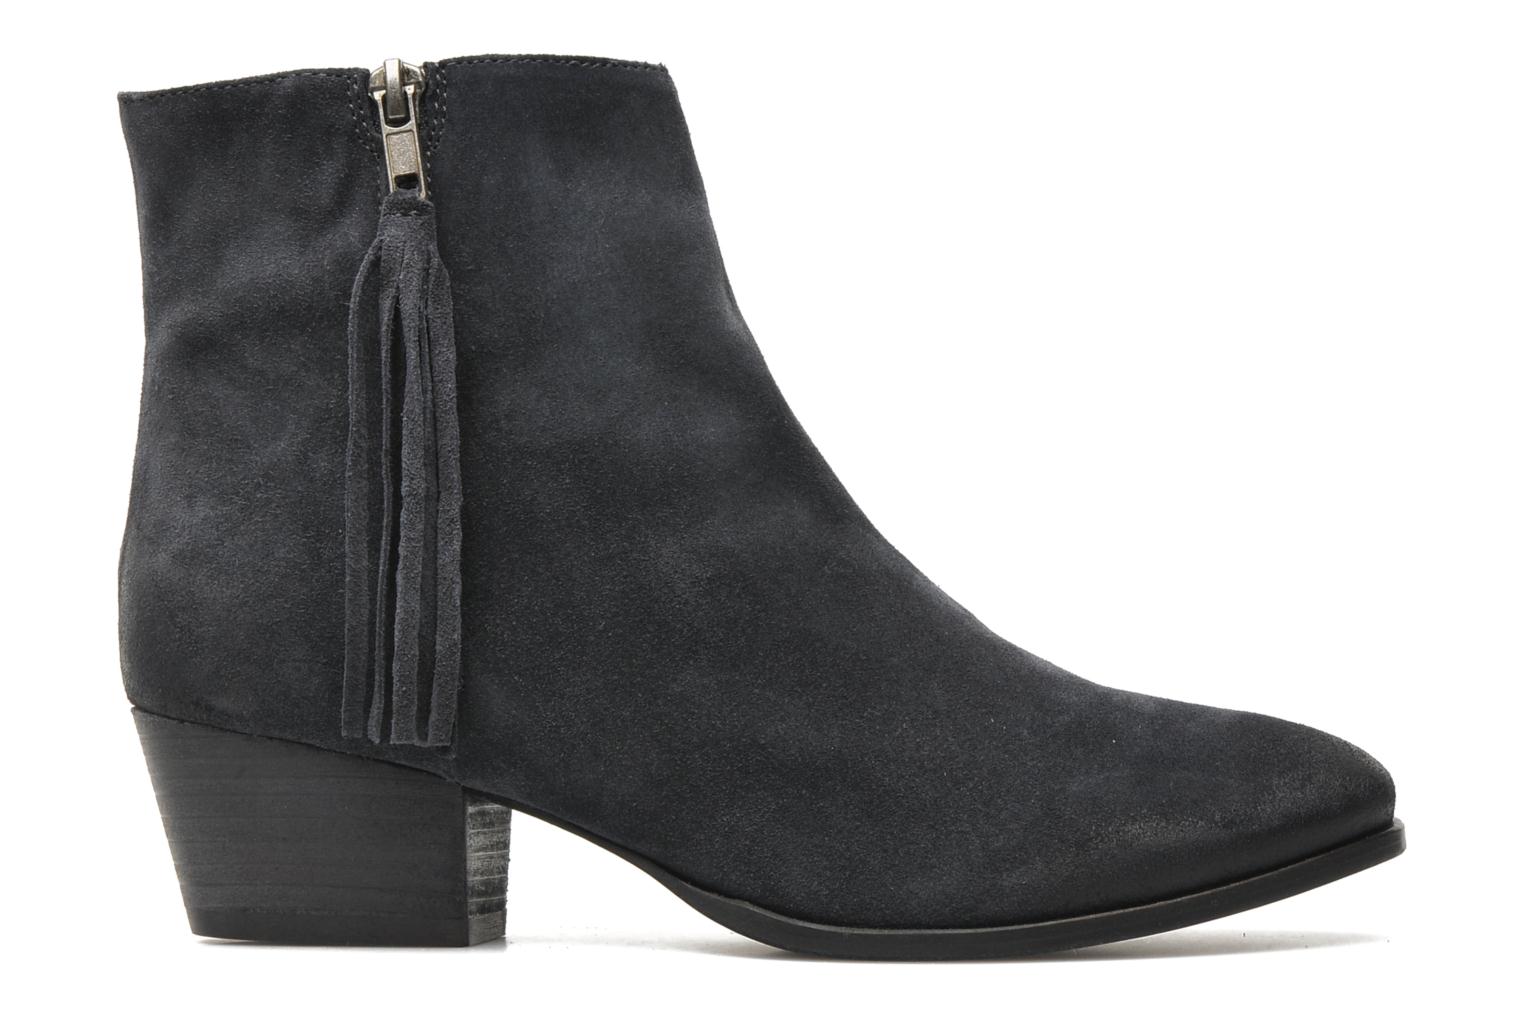 Georgia Rose Timalo Ankle boots in Blue at Sarenza.co.uk (183959)